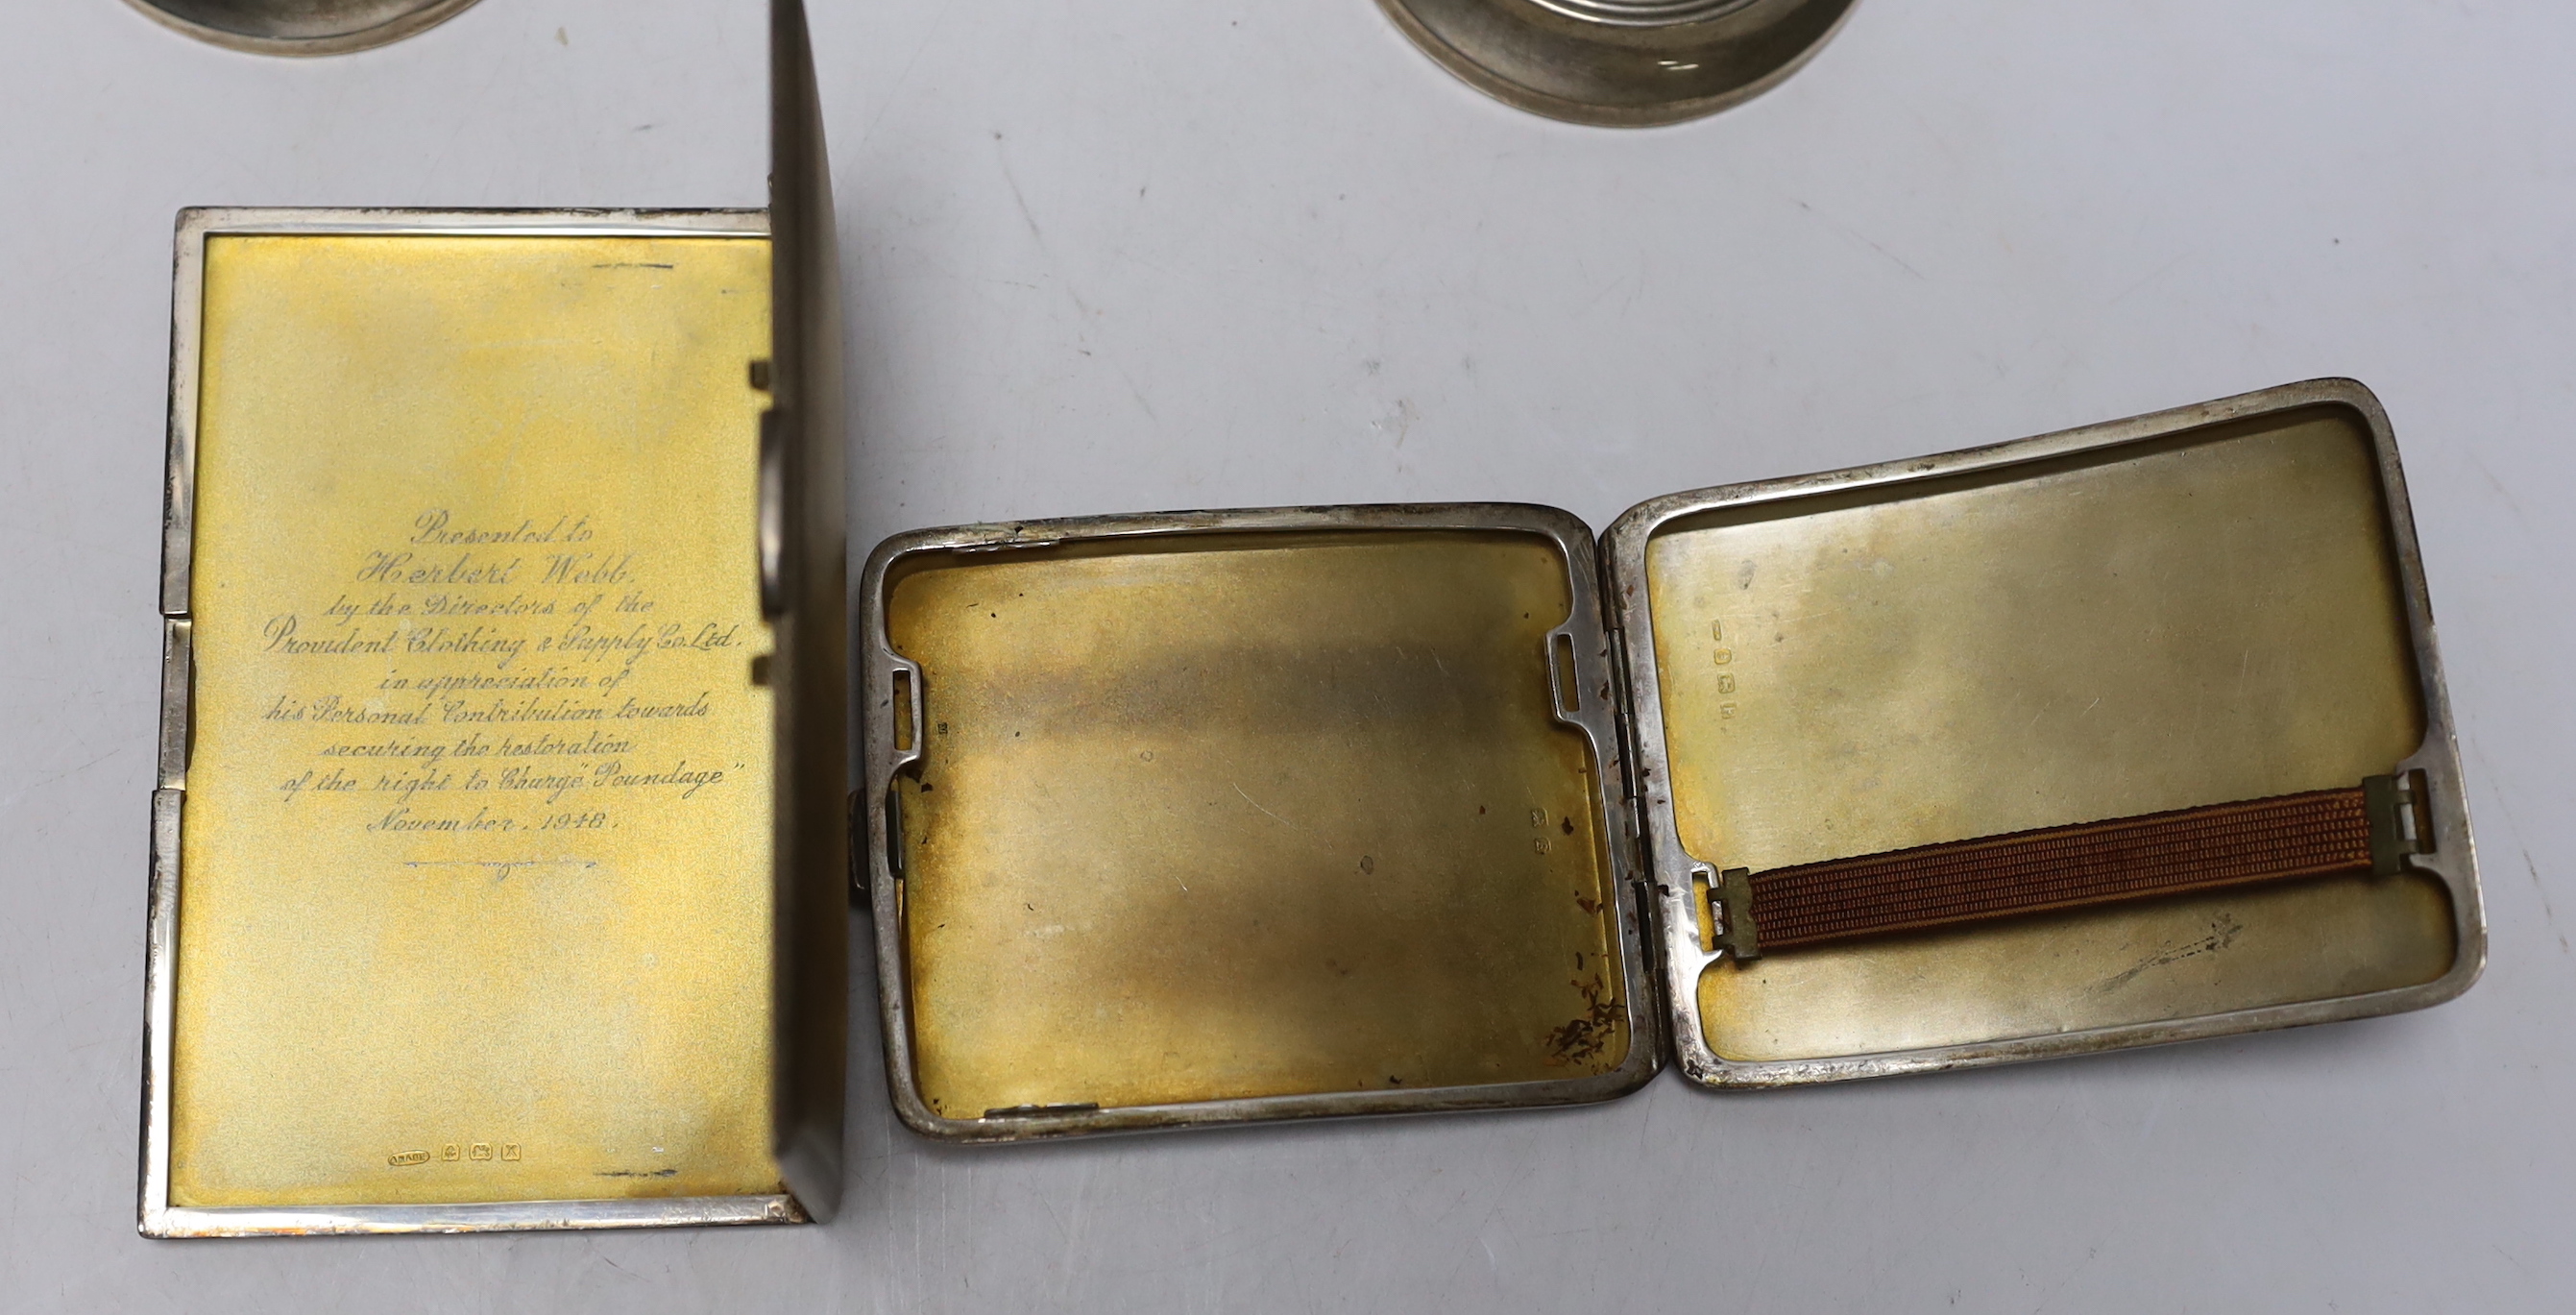 Two engine turned silver cigarette cases, largest 13.5cm and a pair of silver mounted dwarf candlesticks.